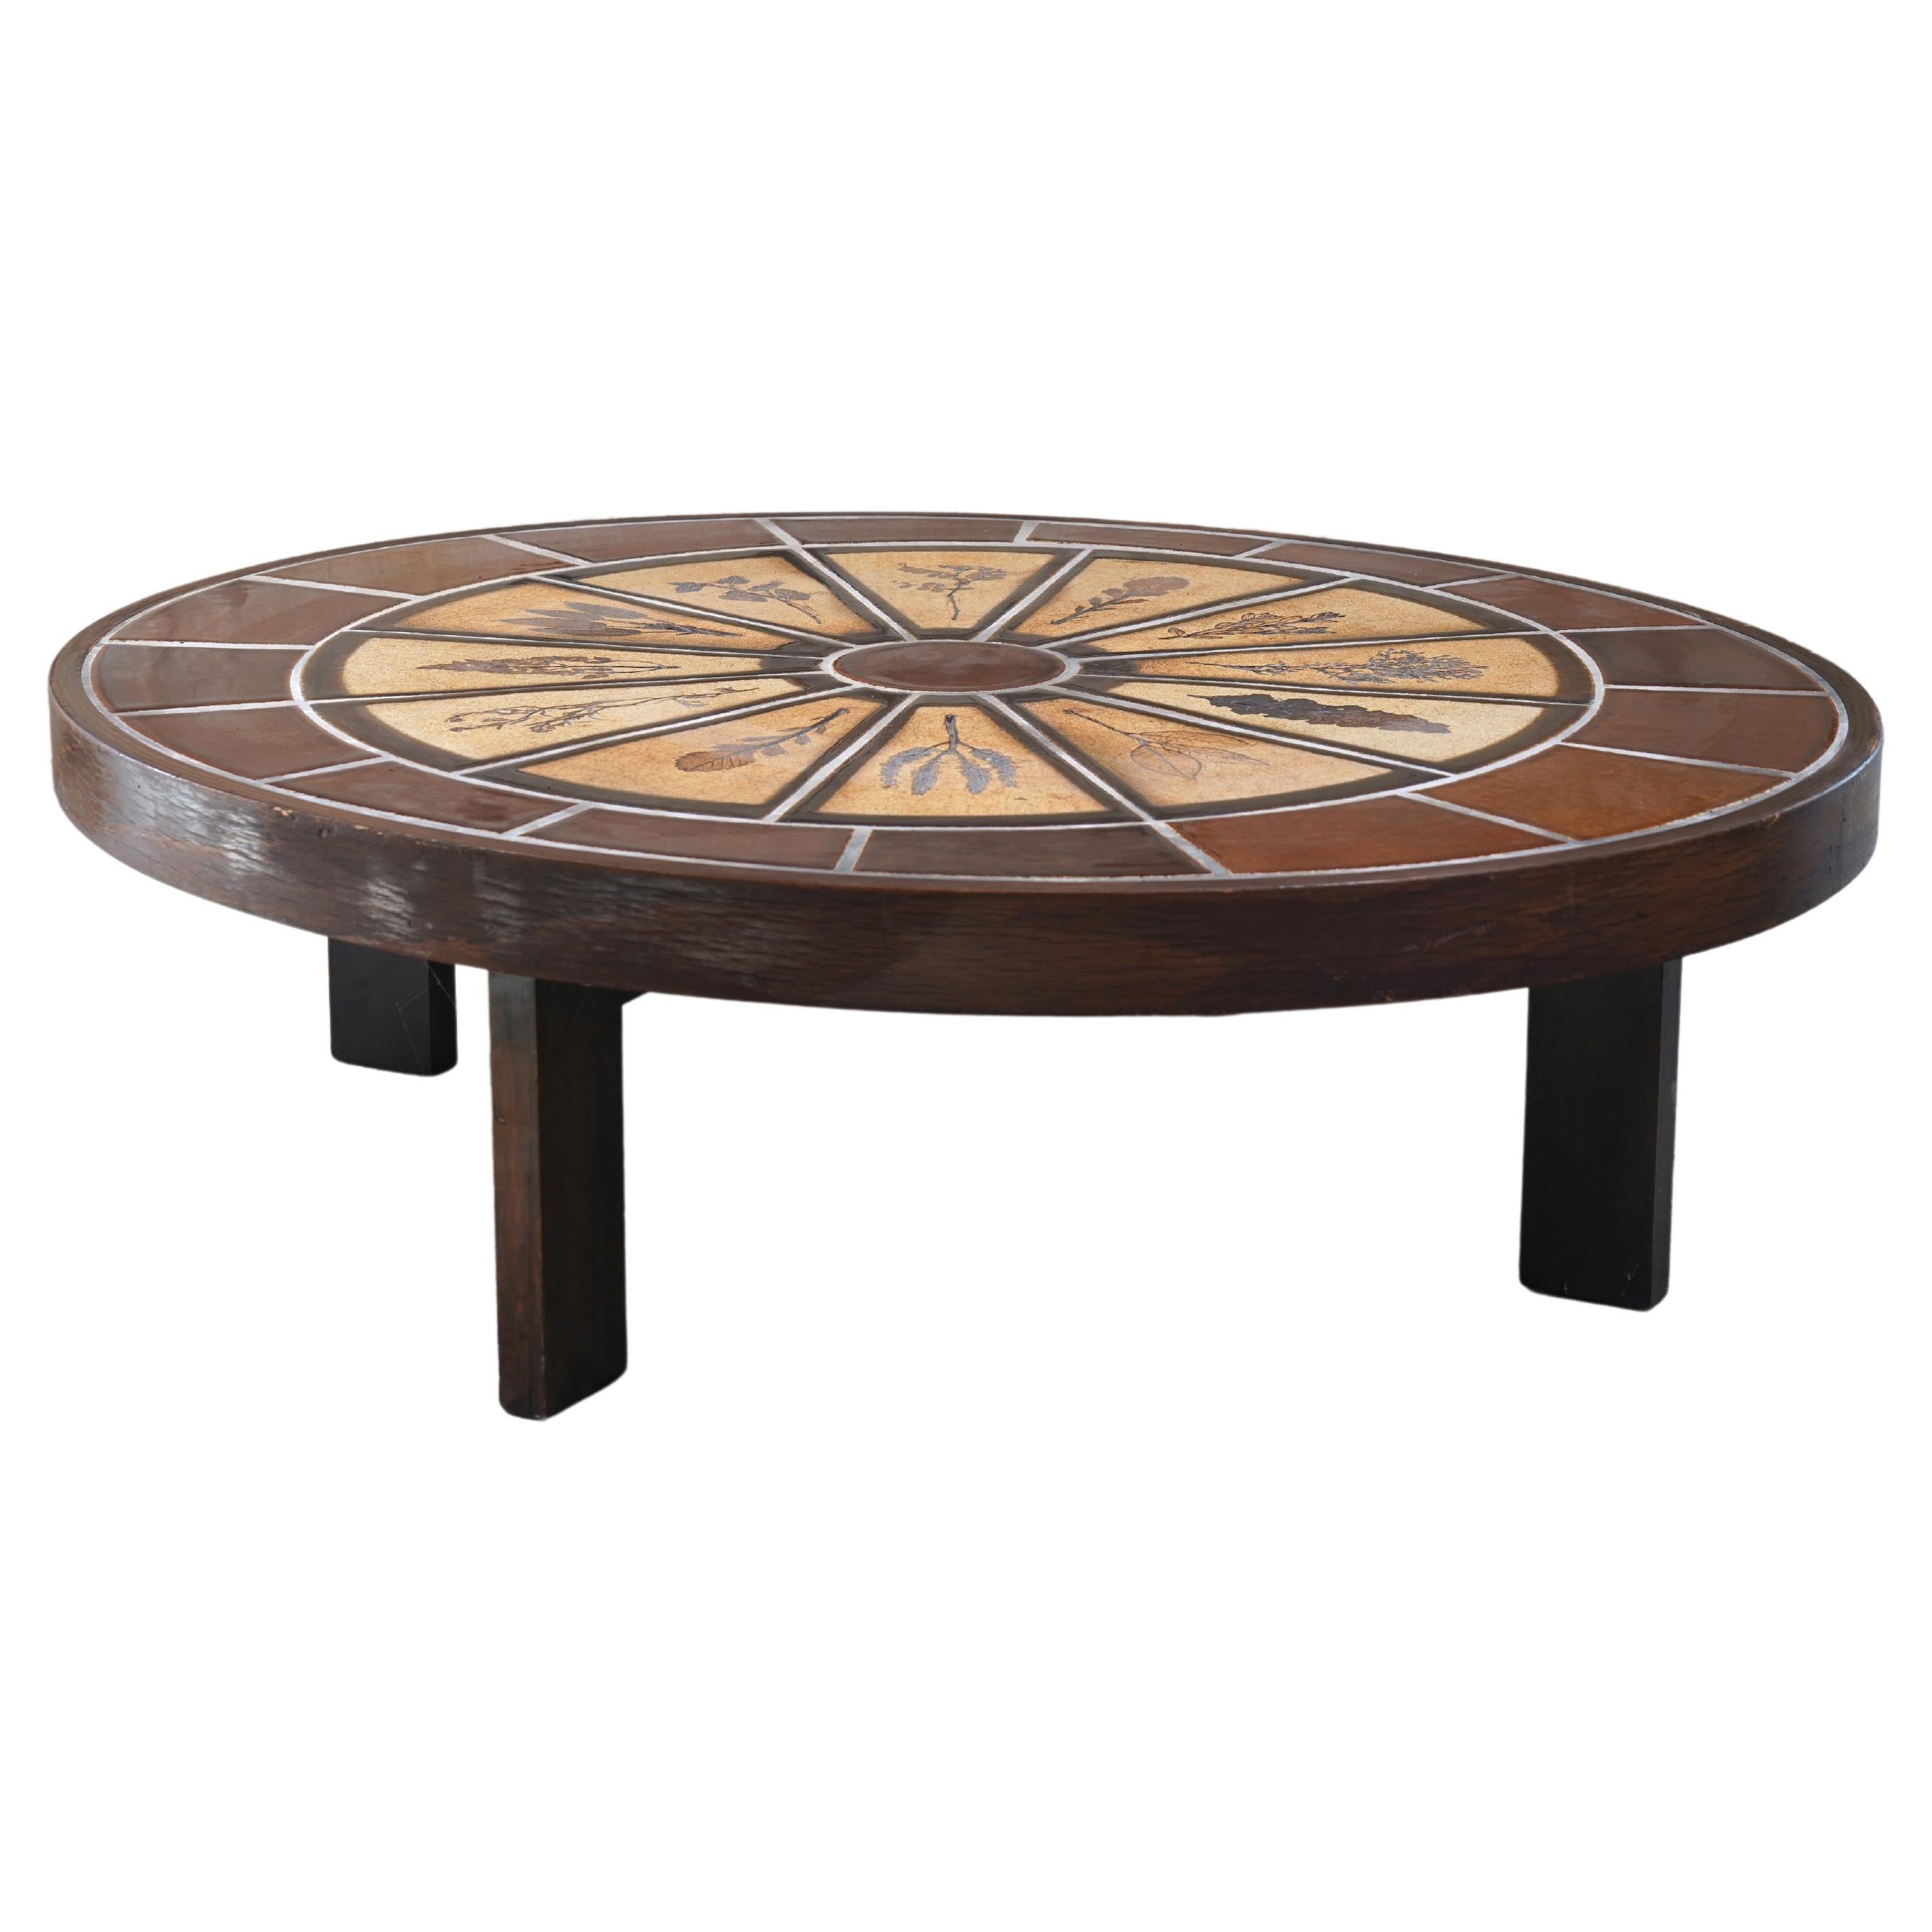 Roger Capron Oval Coffee Table with Garrigue Tiles, France 1960s For Sale